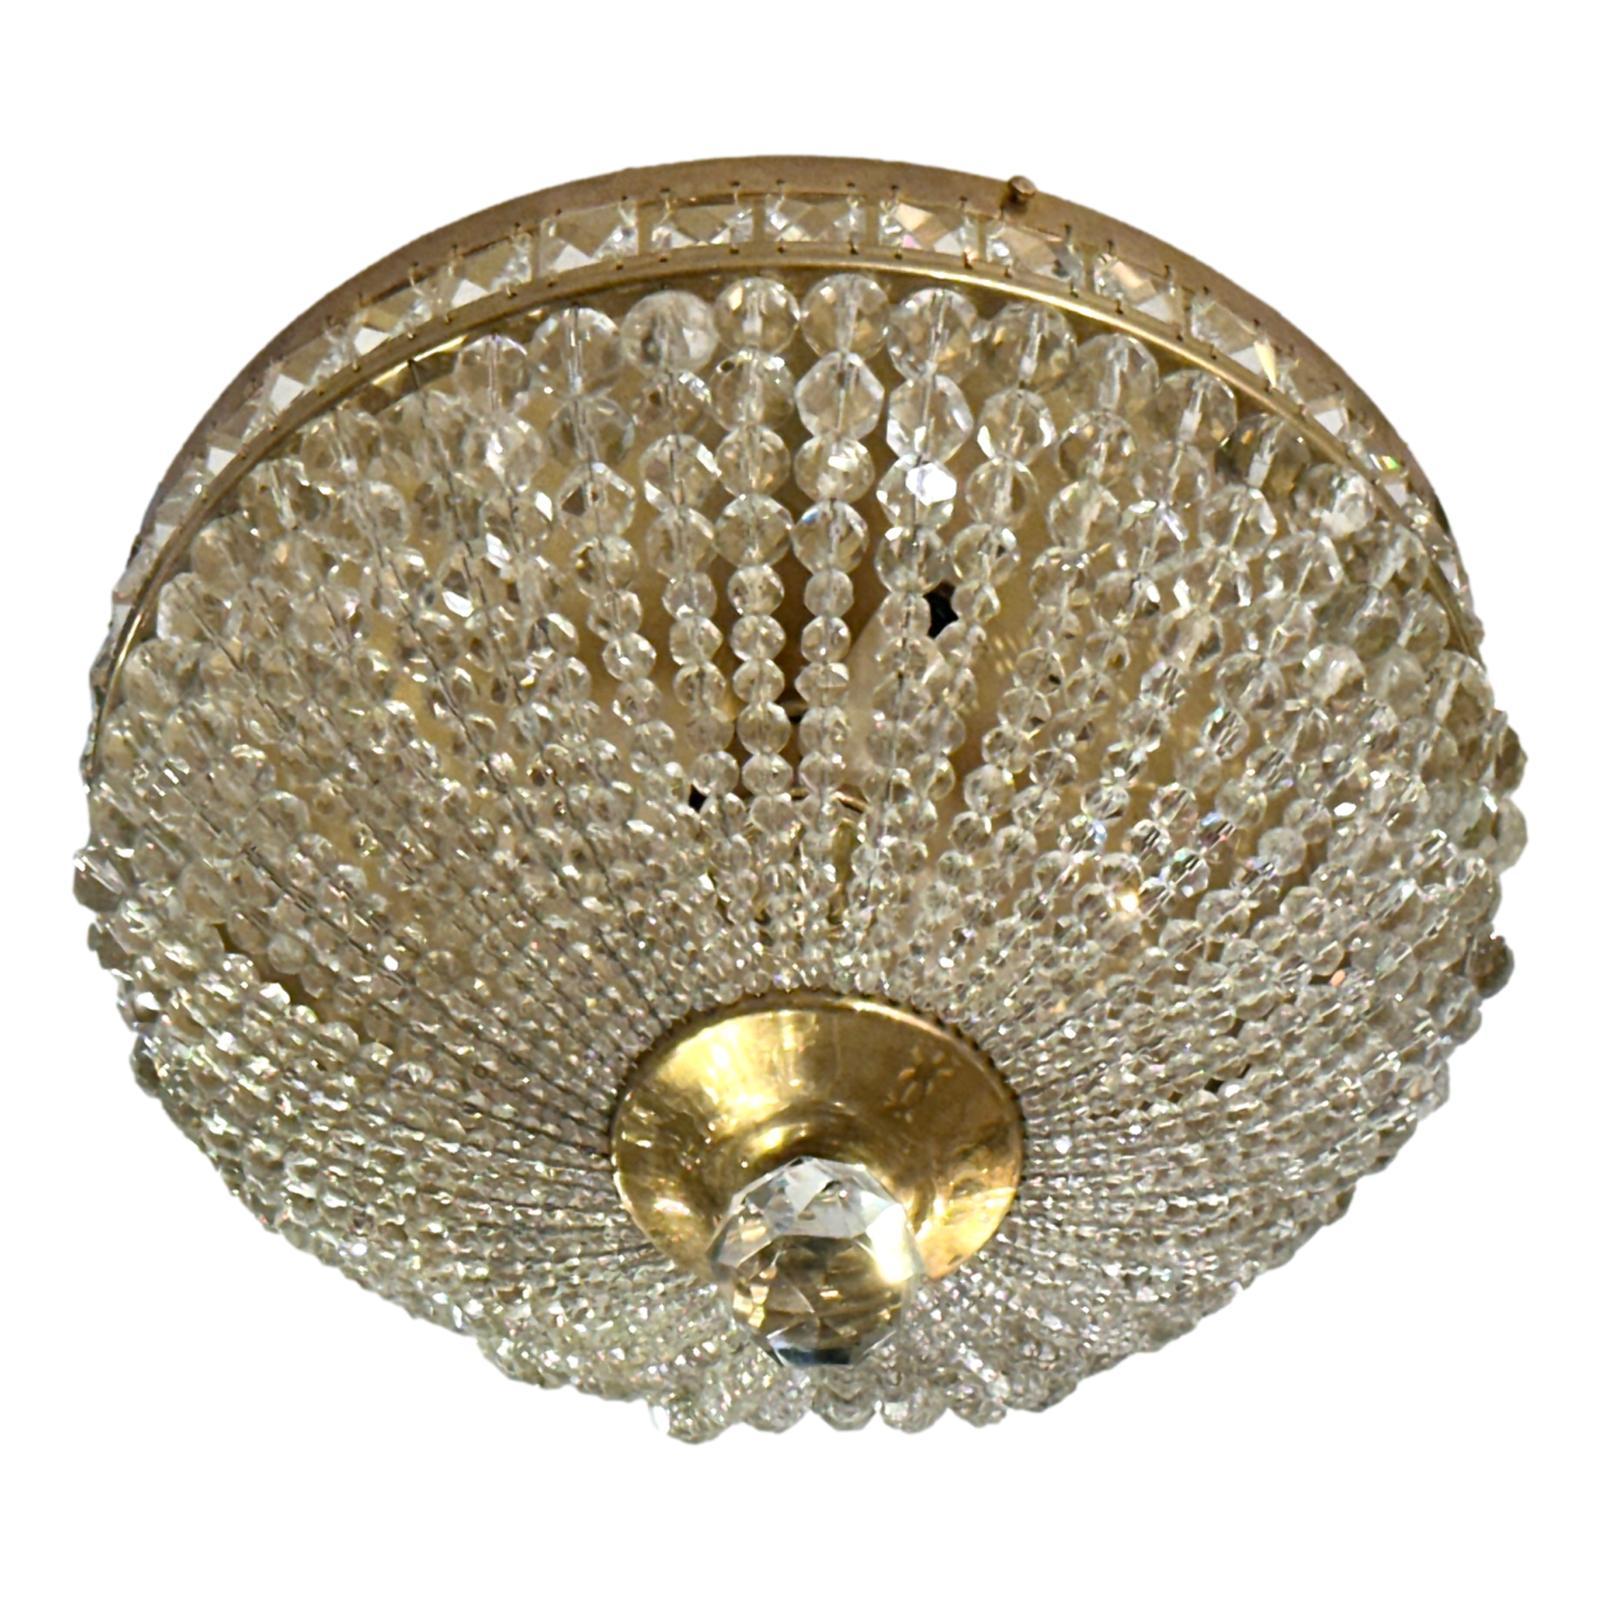 Set of 1950's French gilt metal light fixtures with crystal beads and interior lights. Sold Individually

Measurements:
Diameter:13″
Height: 8.25″ 